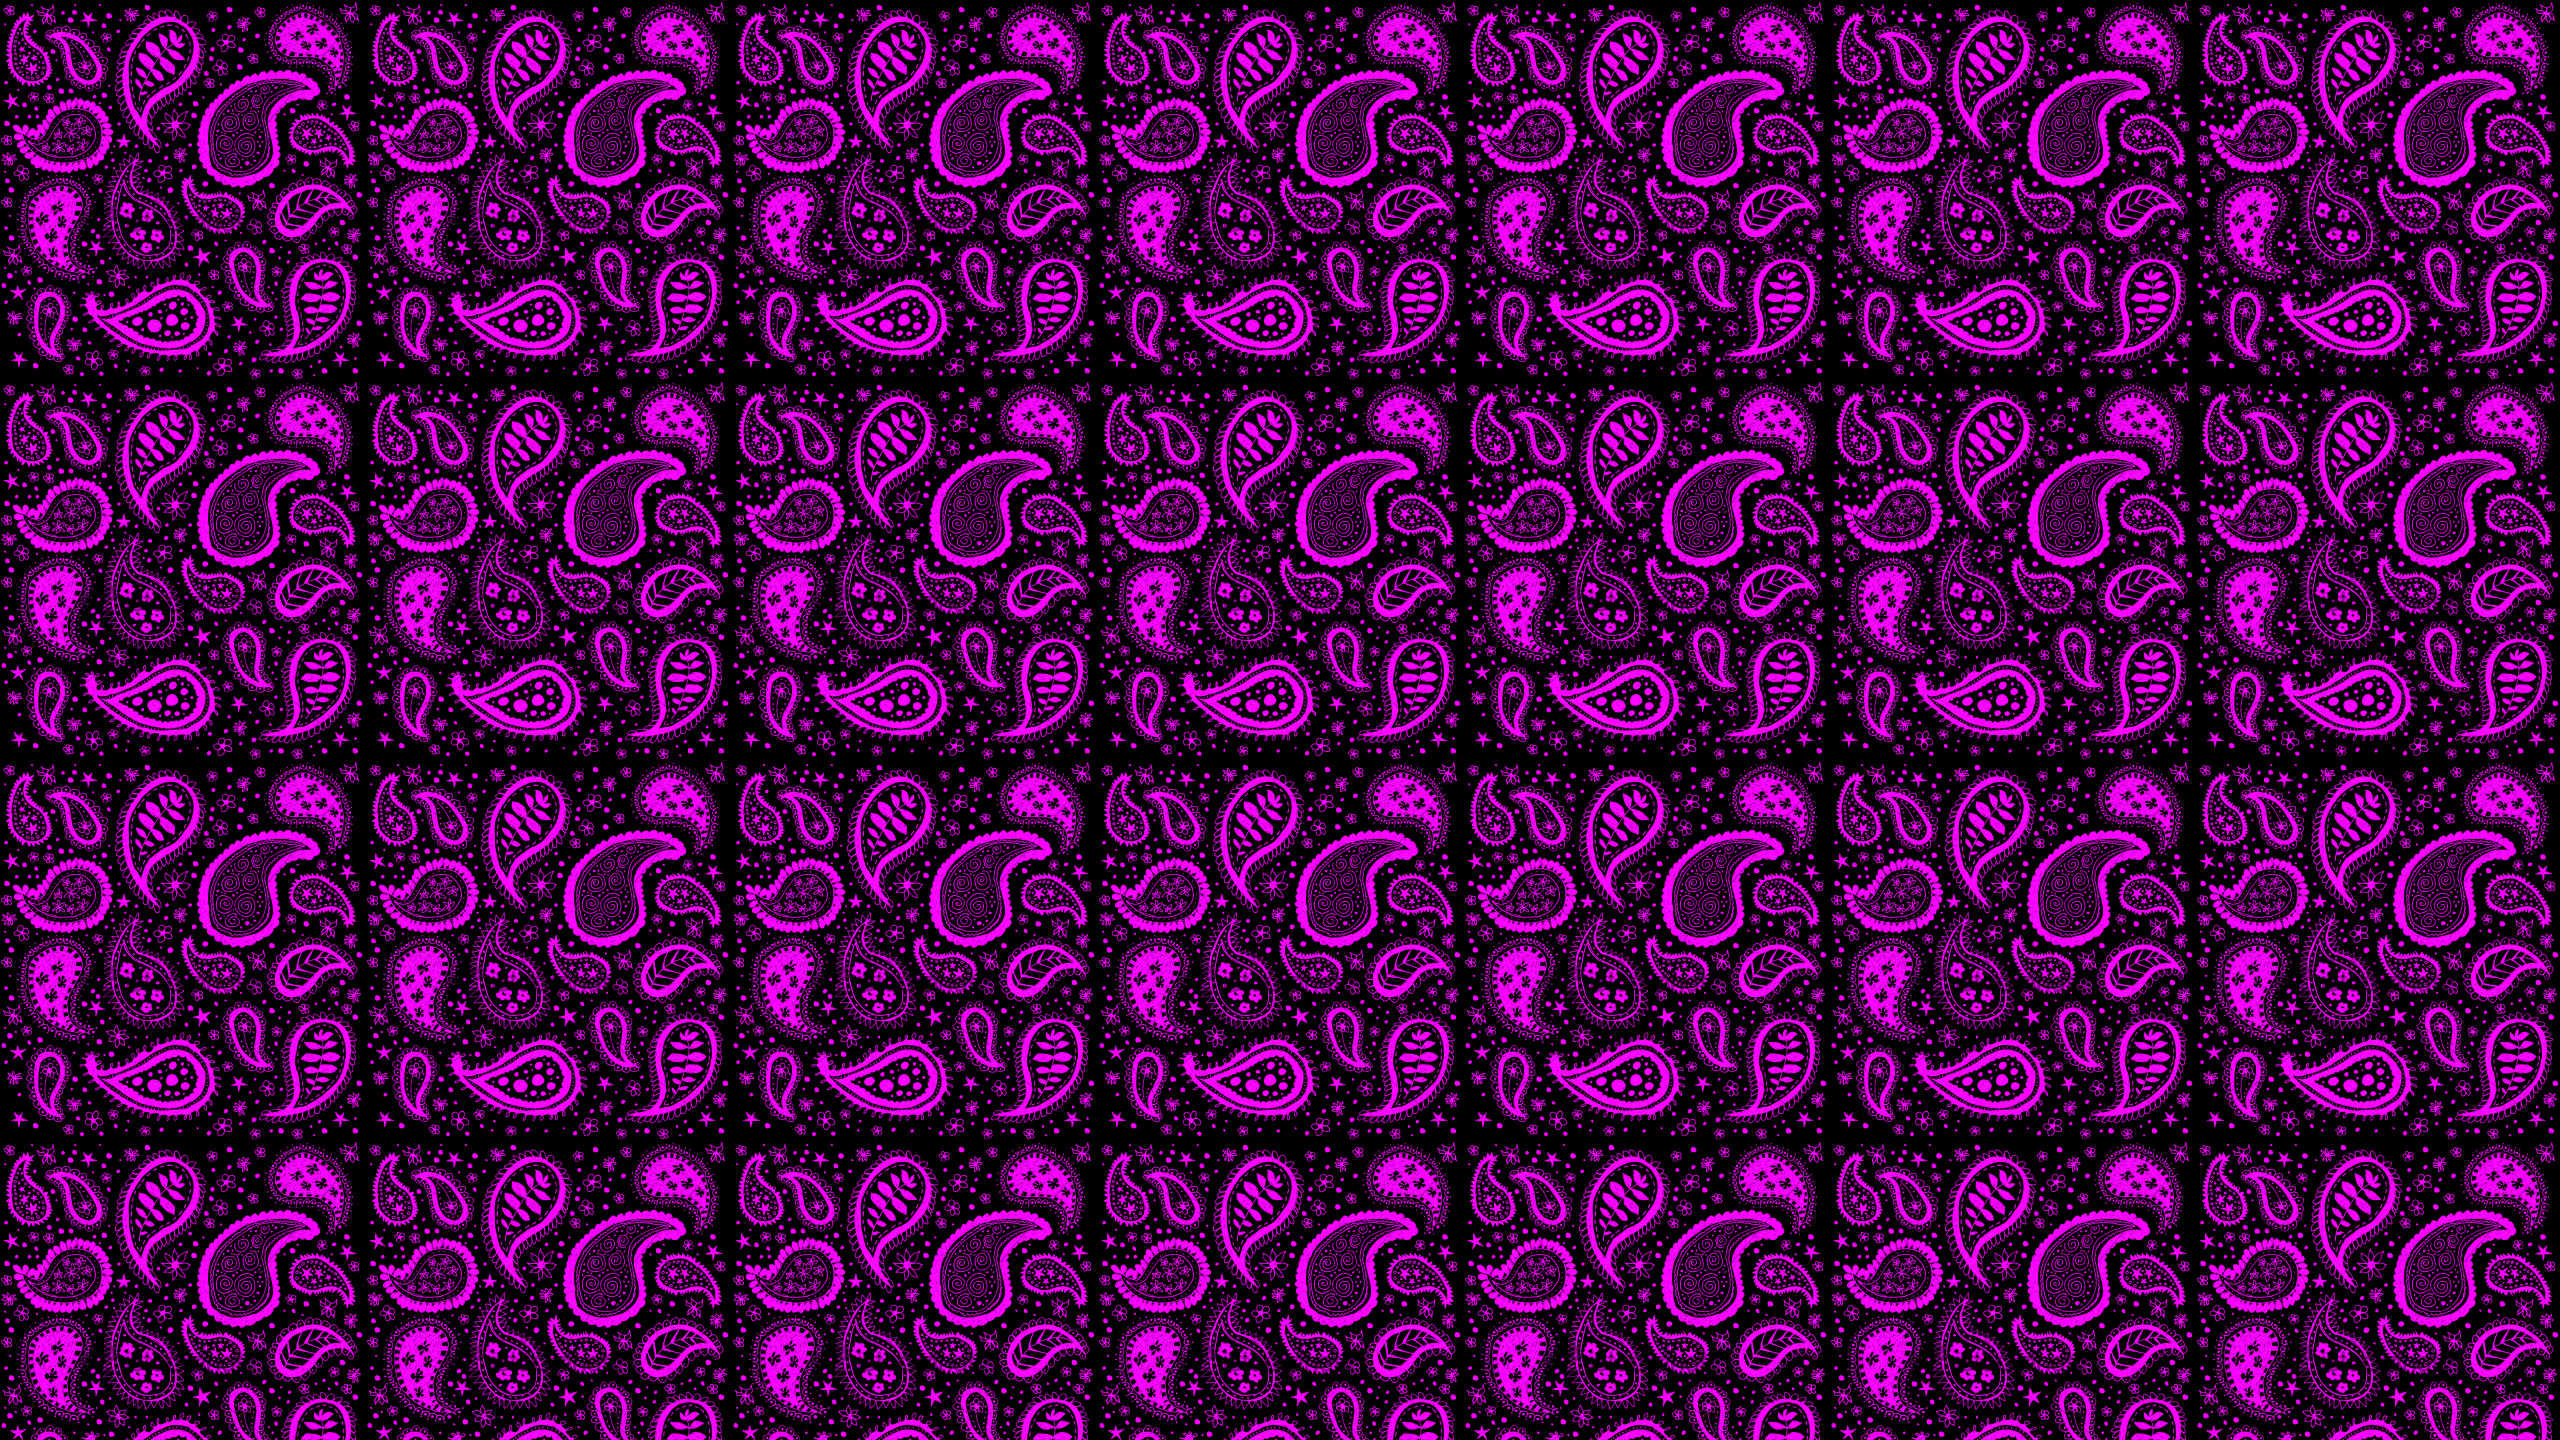 Hot Pink Paisley Desktop Wallpaper Is Easy Just Save The